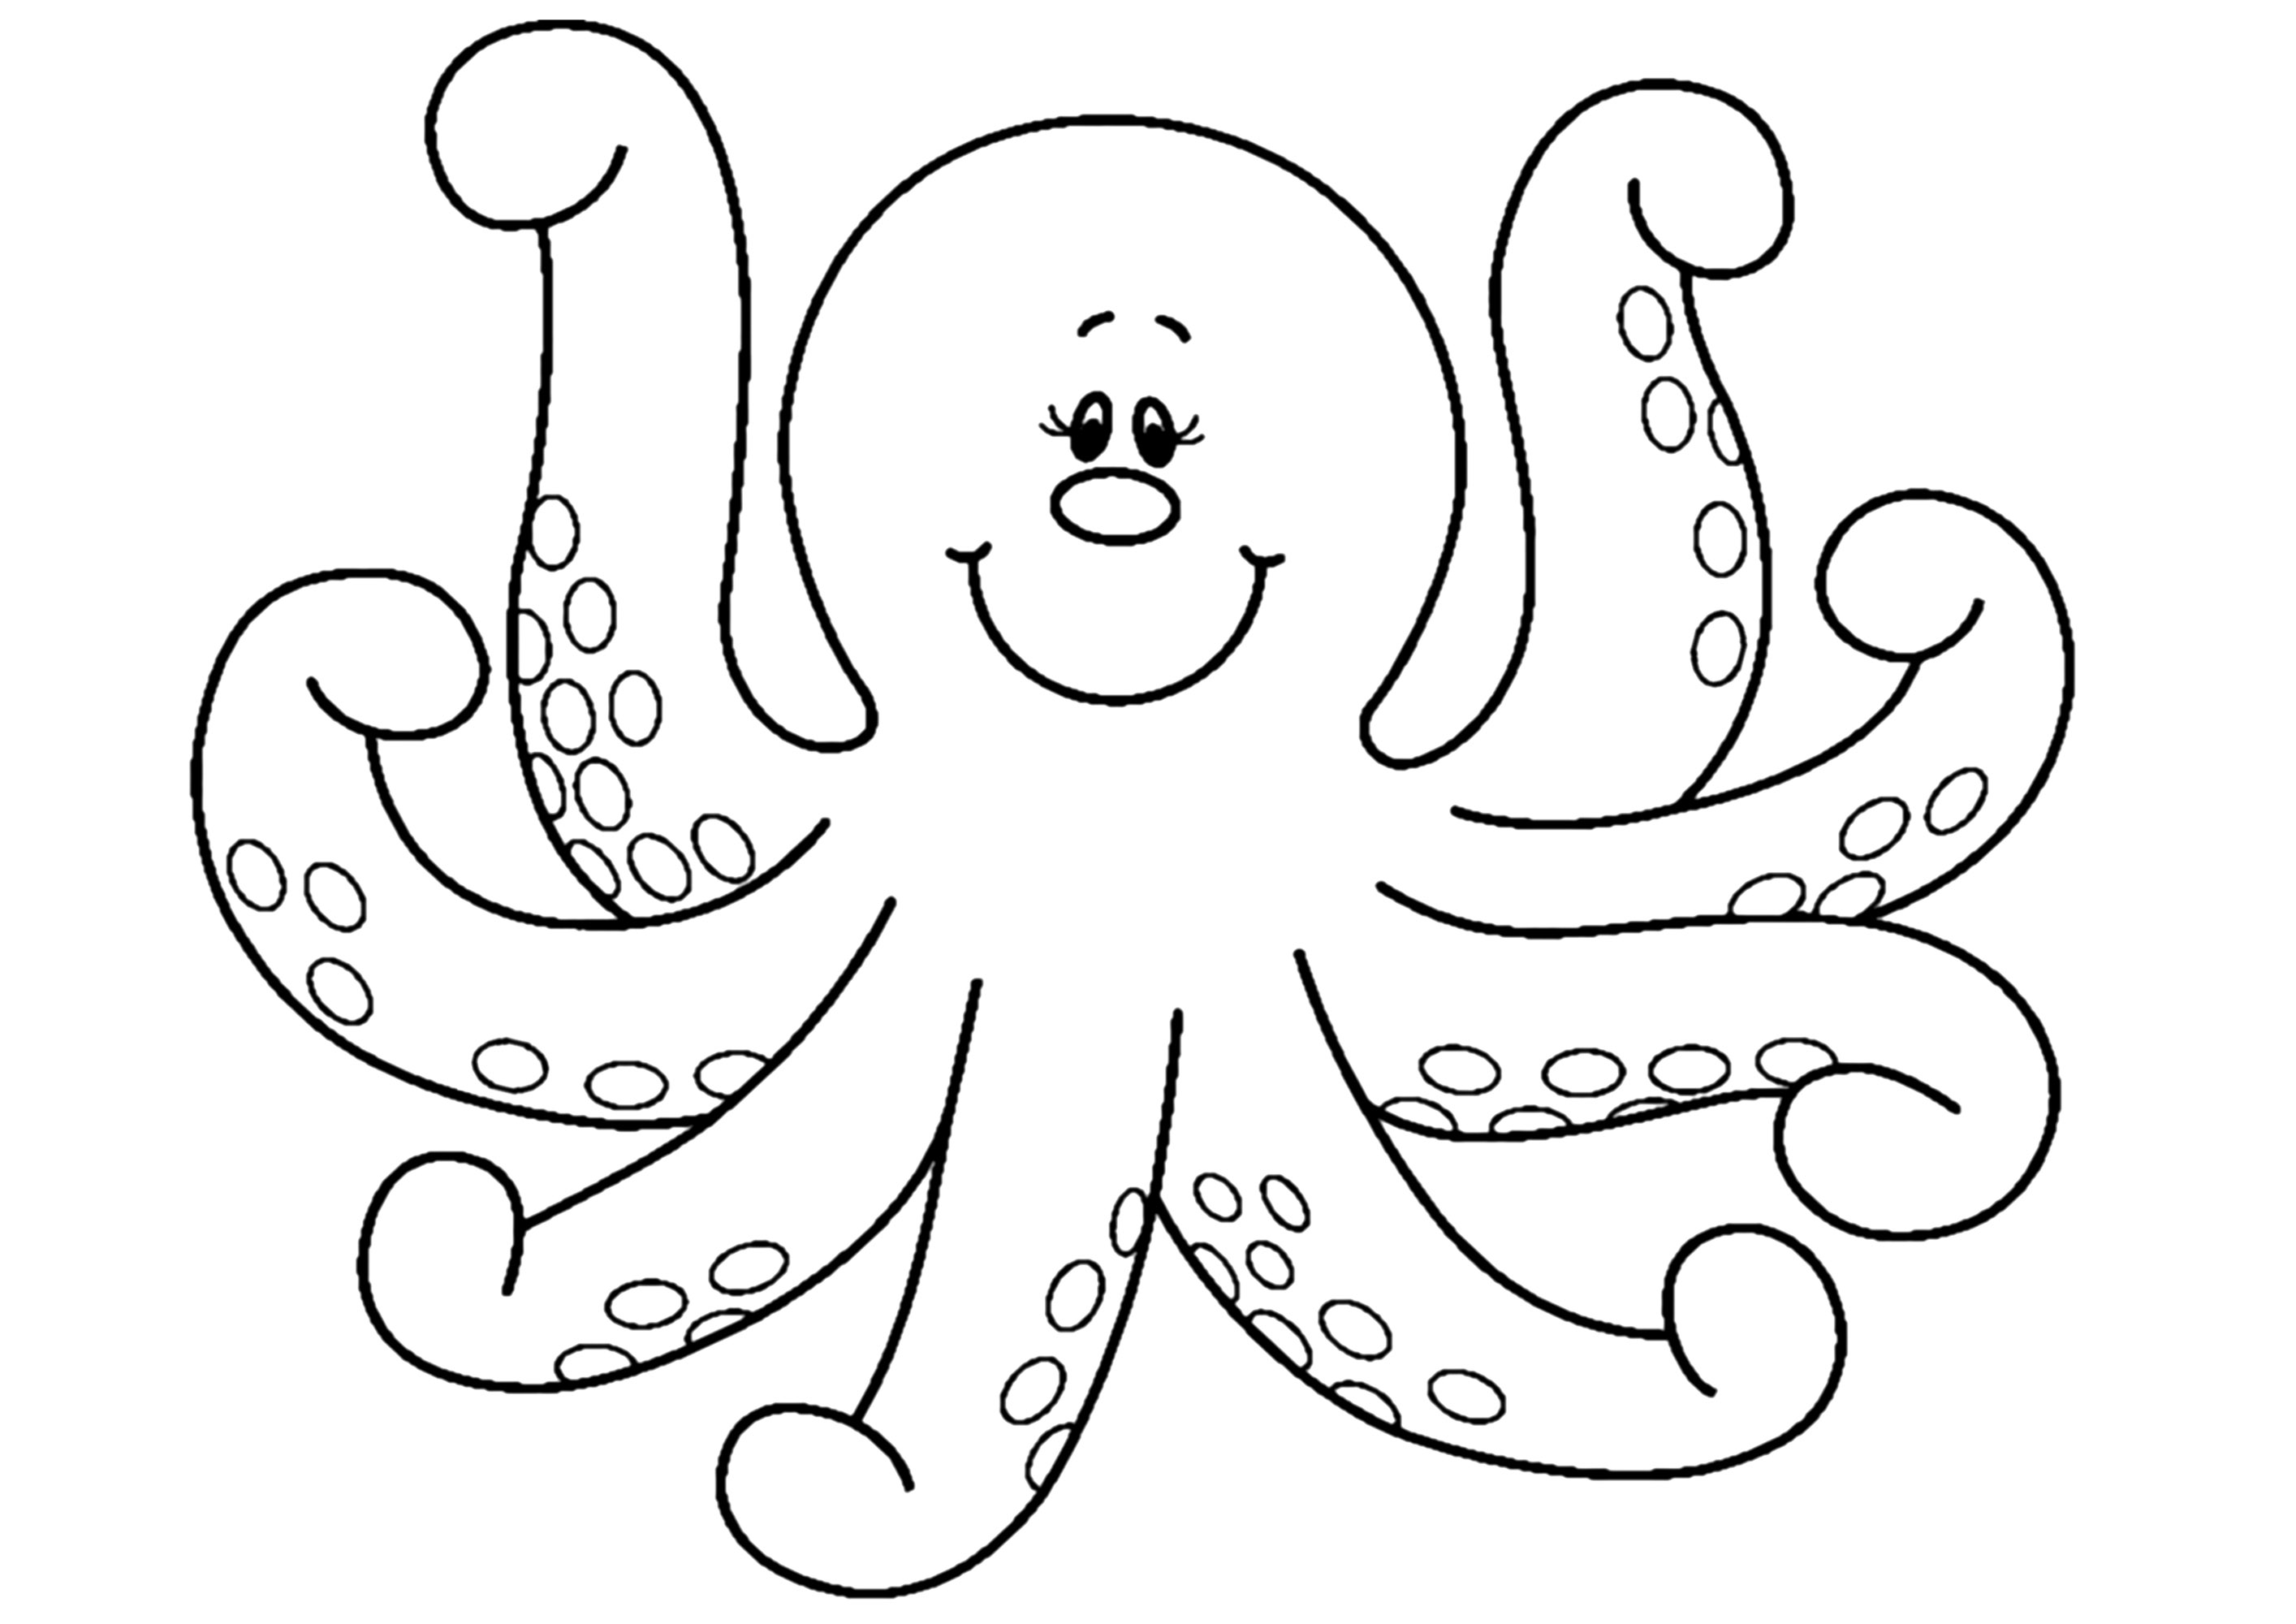 Simple smiling octopus to print and color